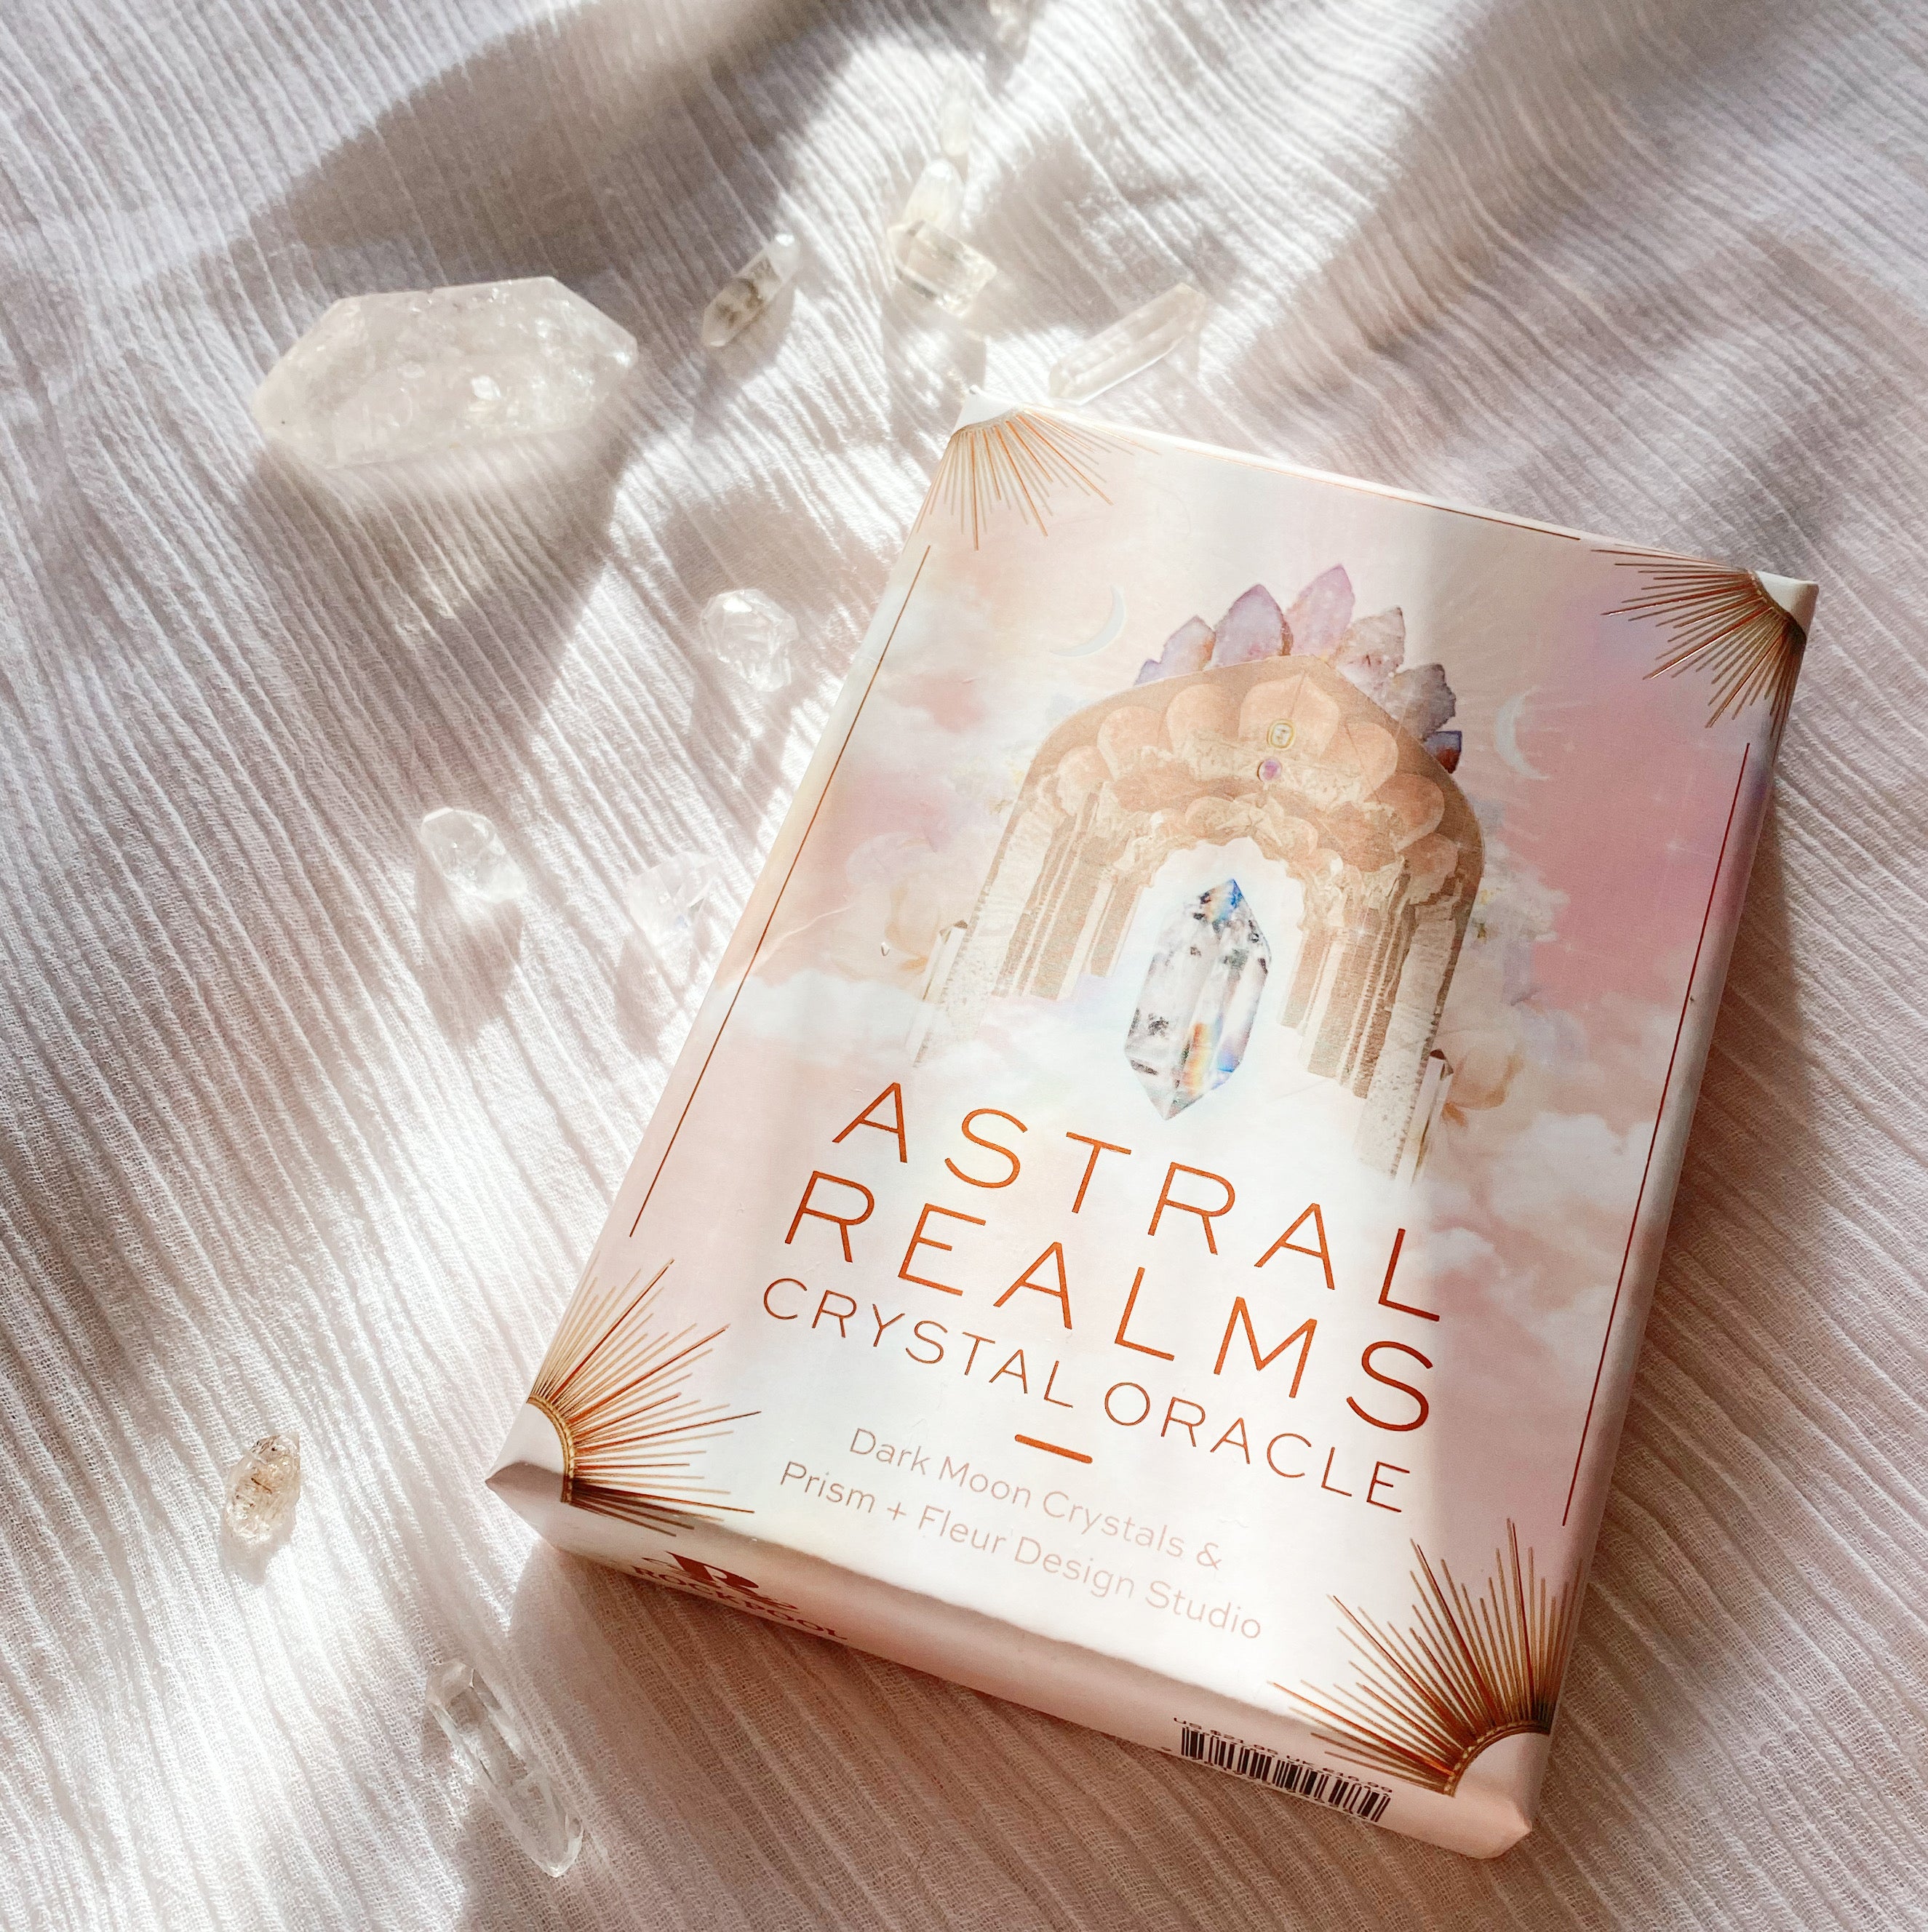 Astral Realms Crystal Oracle Deck | Rose Gold Gilding | 33 Card Deck with Guidebook |  Pastel Pink Cute Oracle | Astrology Deck | Crystal Healing